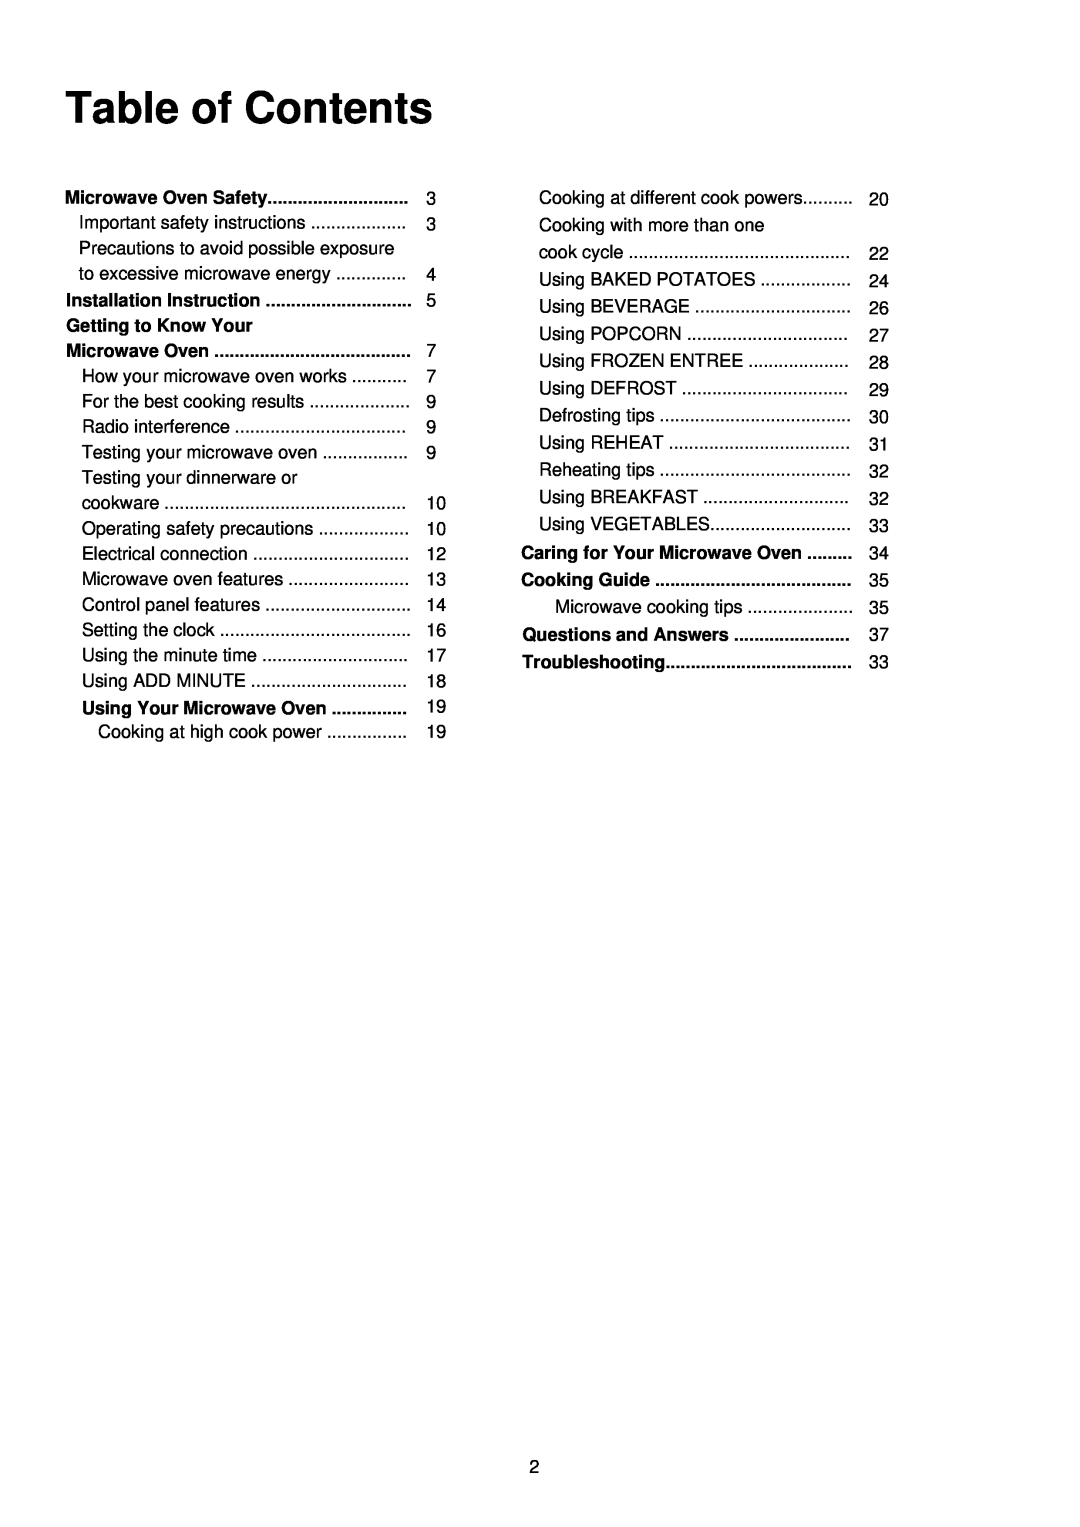 Palsonic PMO-850 Table of Contents, Getting to Know Your, Using Your Microwave Oven, Caring for Your Microwave Oven 